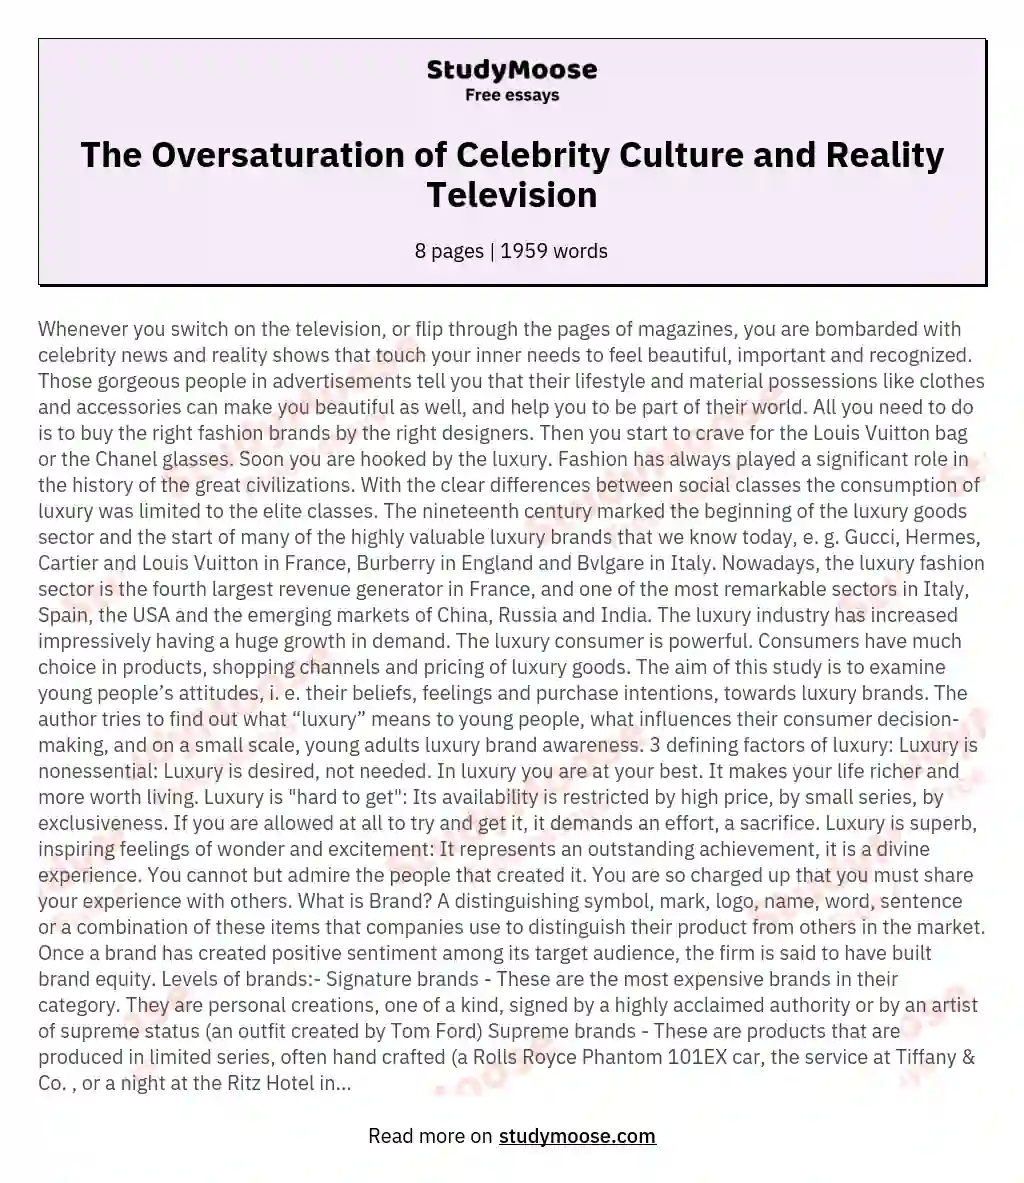 The Oversaturation of Celebrity Culture and Reality Television essay